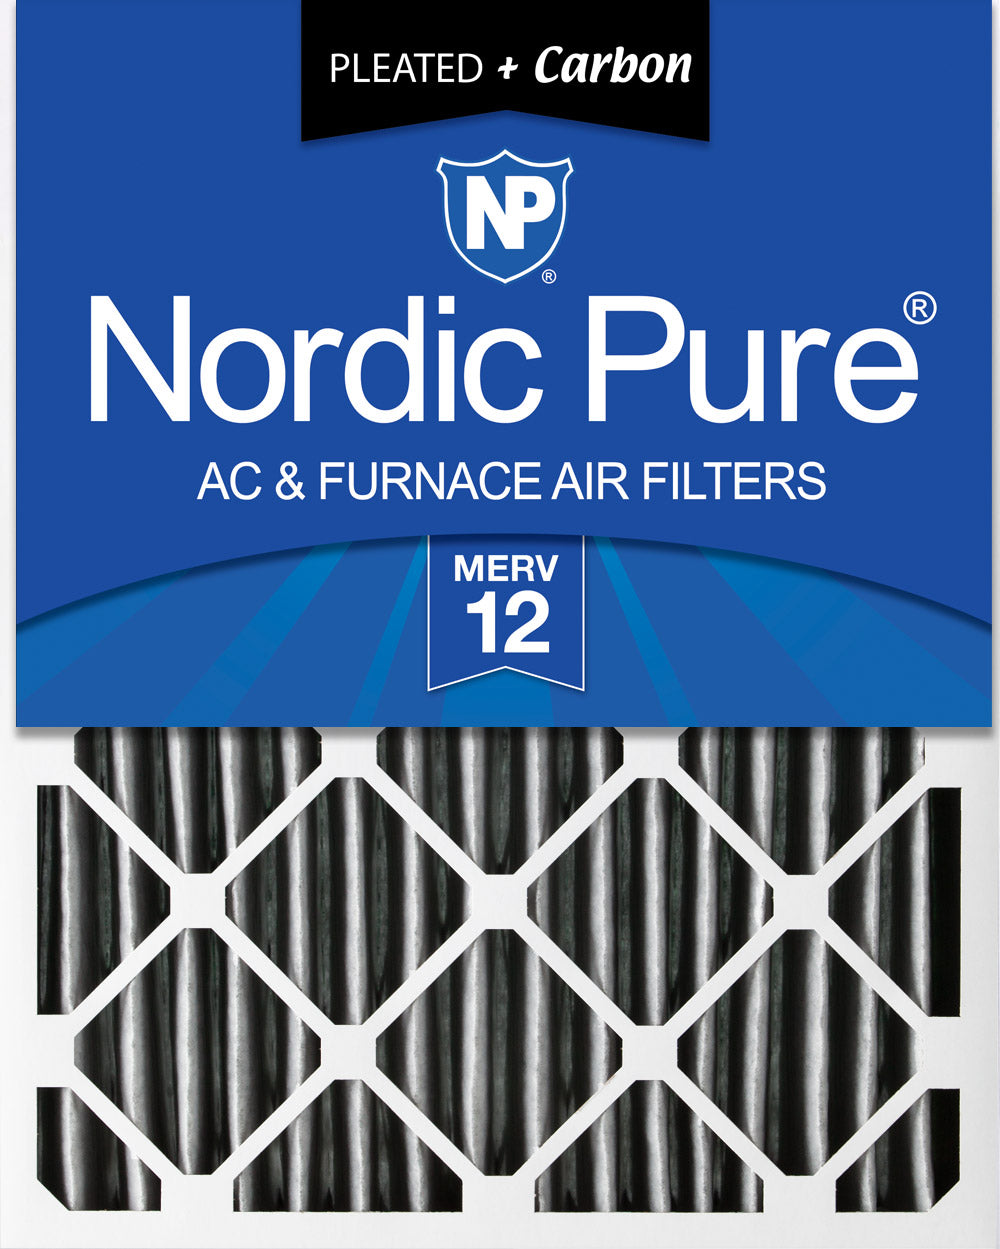 24x24x4 (3 5/8) Furnace Air Filters MERV 12 Pleated Plus Carbon